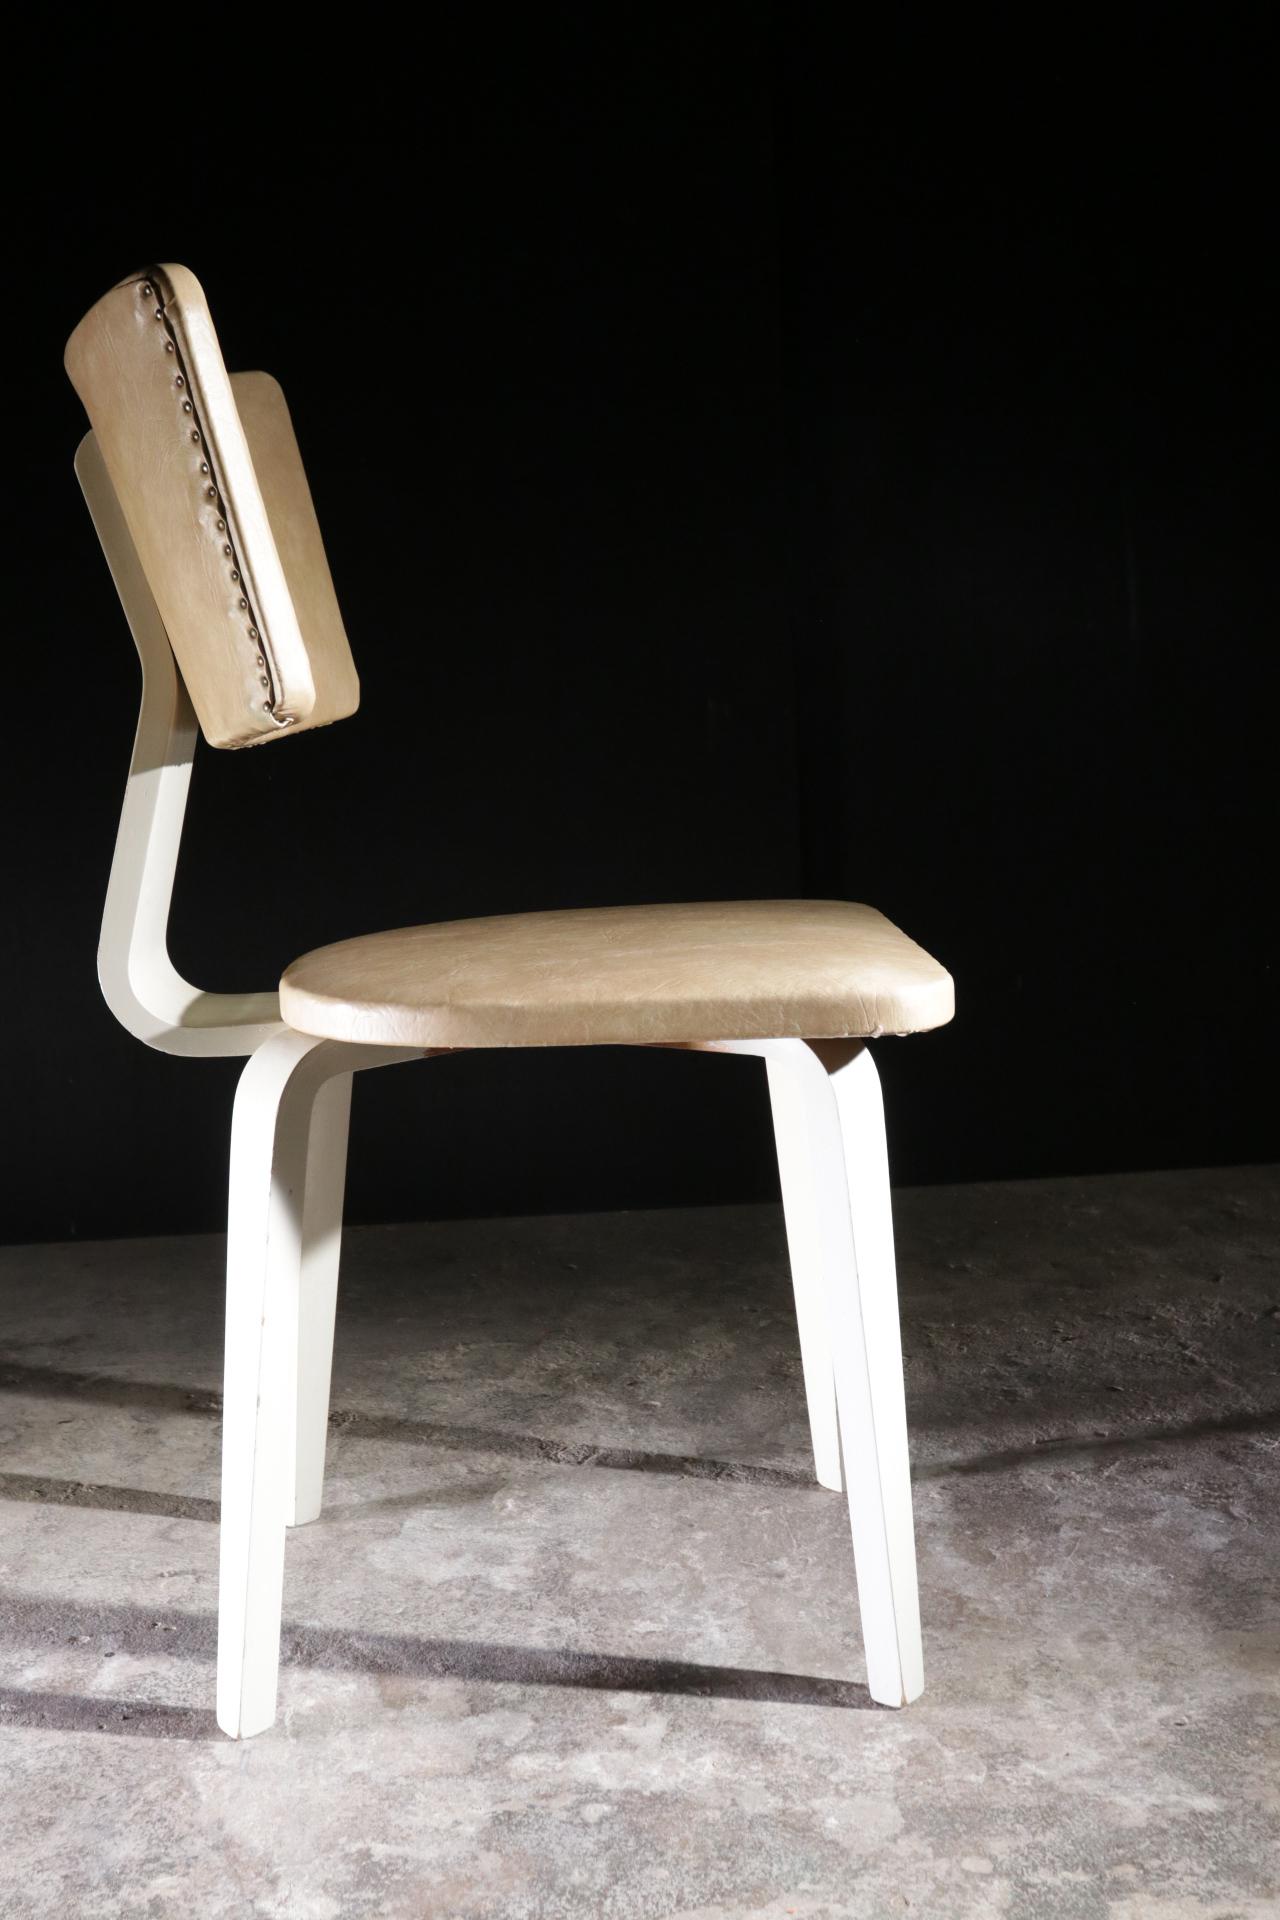 Mid-Century Dining Chair by Cor Alons, Gouda Den Boer Gouda, 1949 For Sale 2